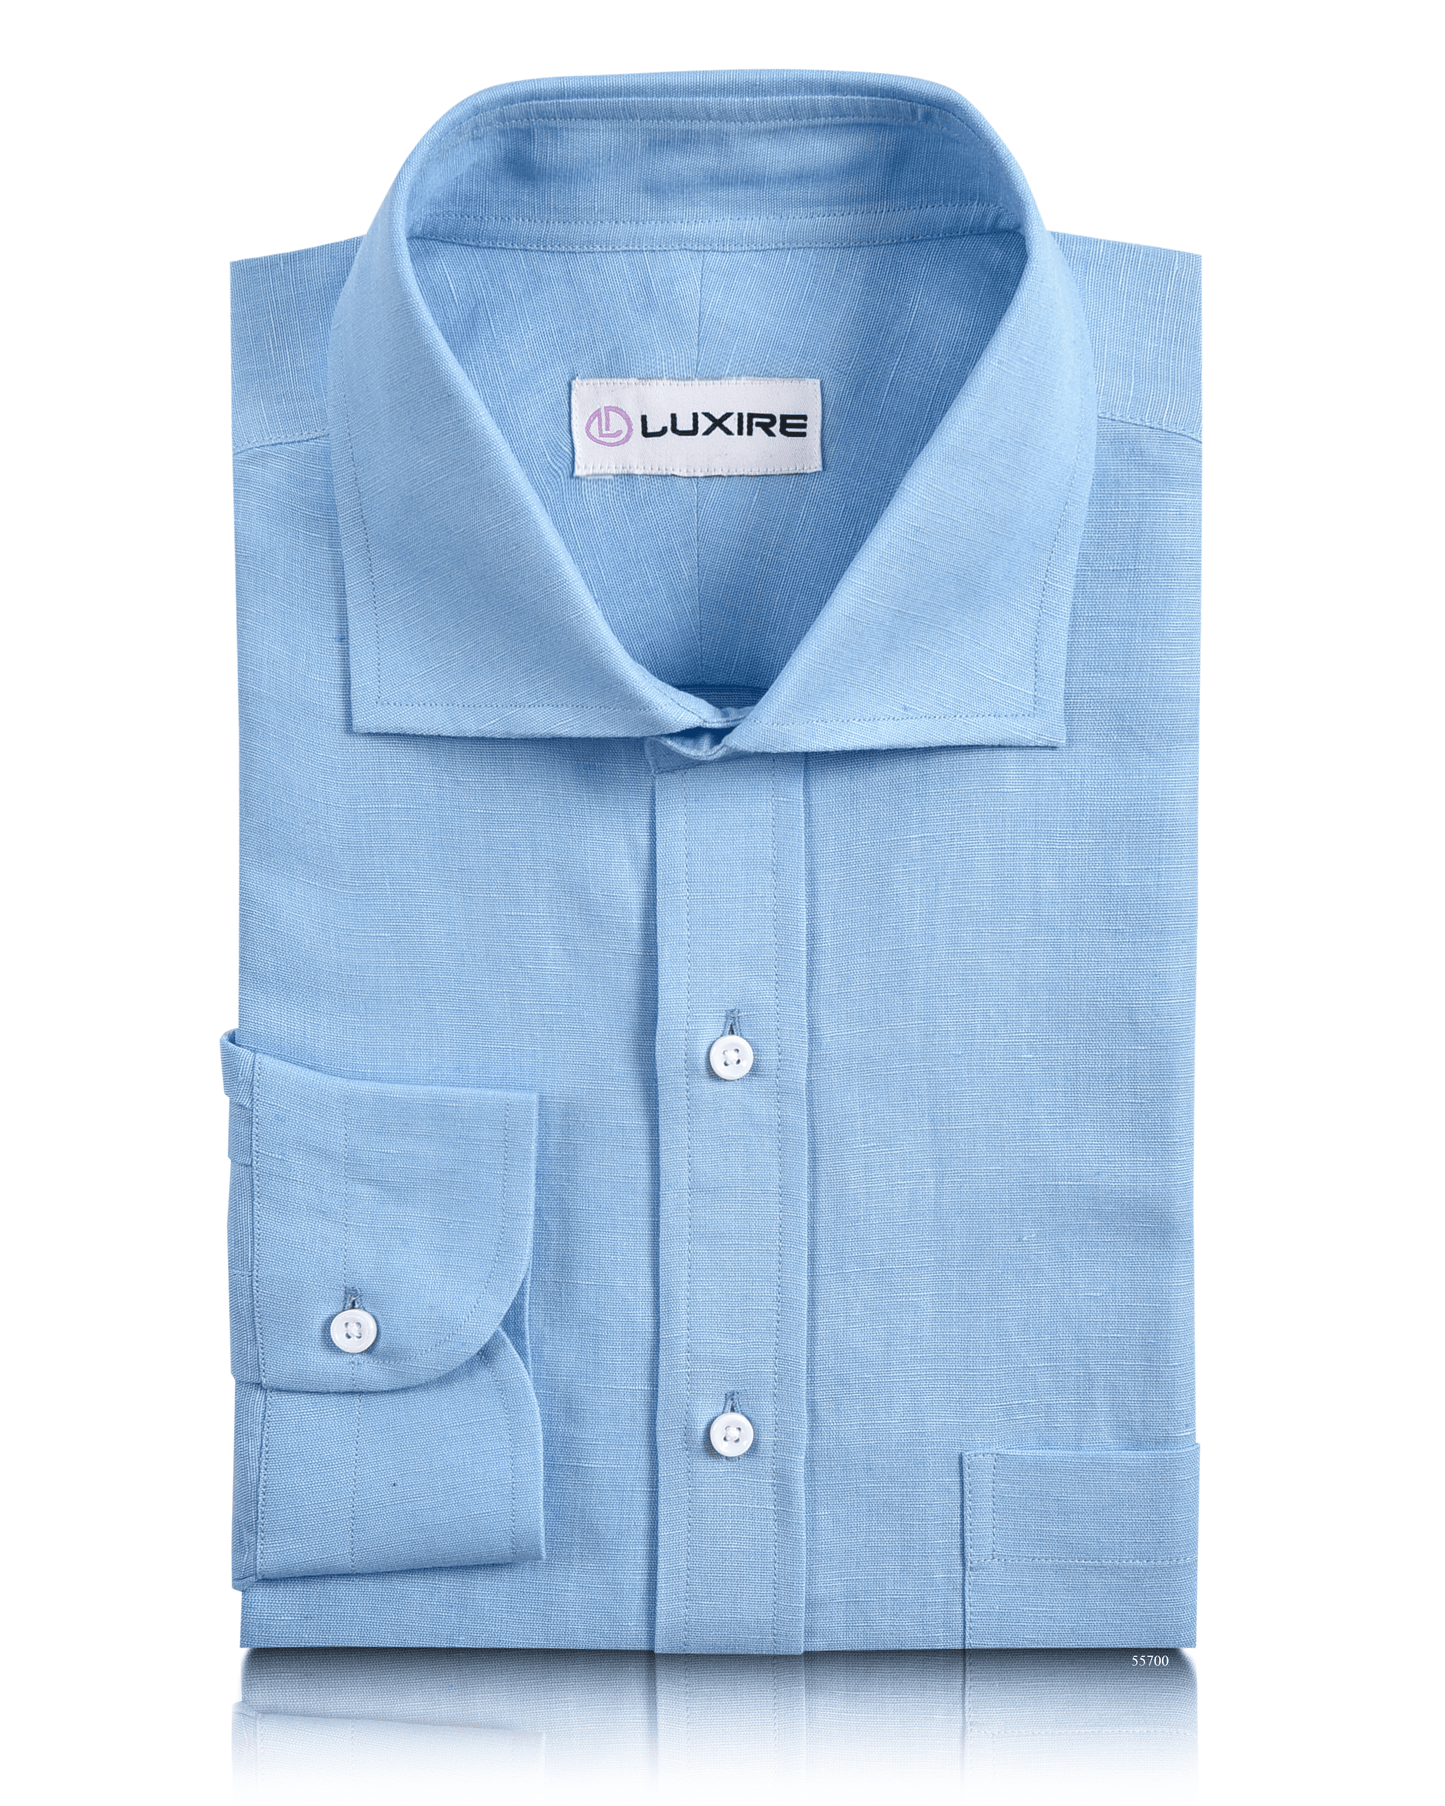 Front of the custom linen shirt for men in mid blue by Luxire Clothing